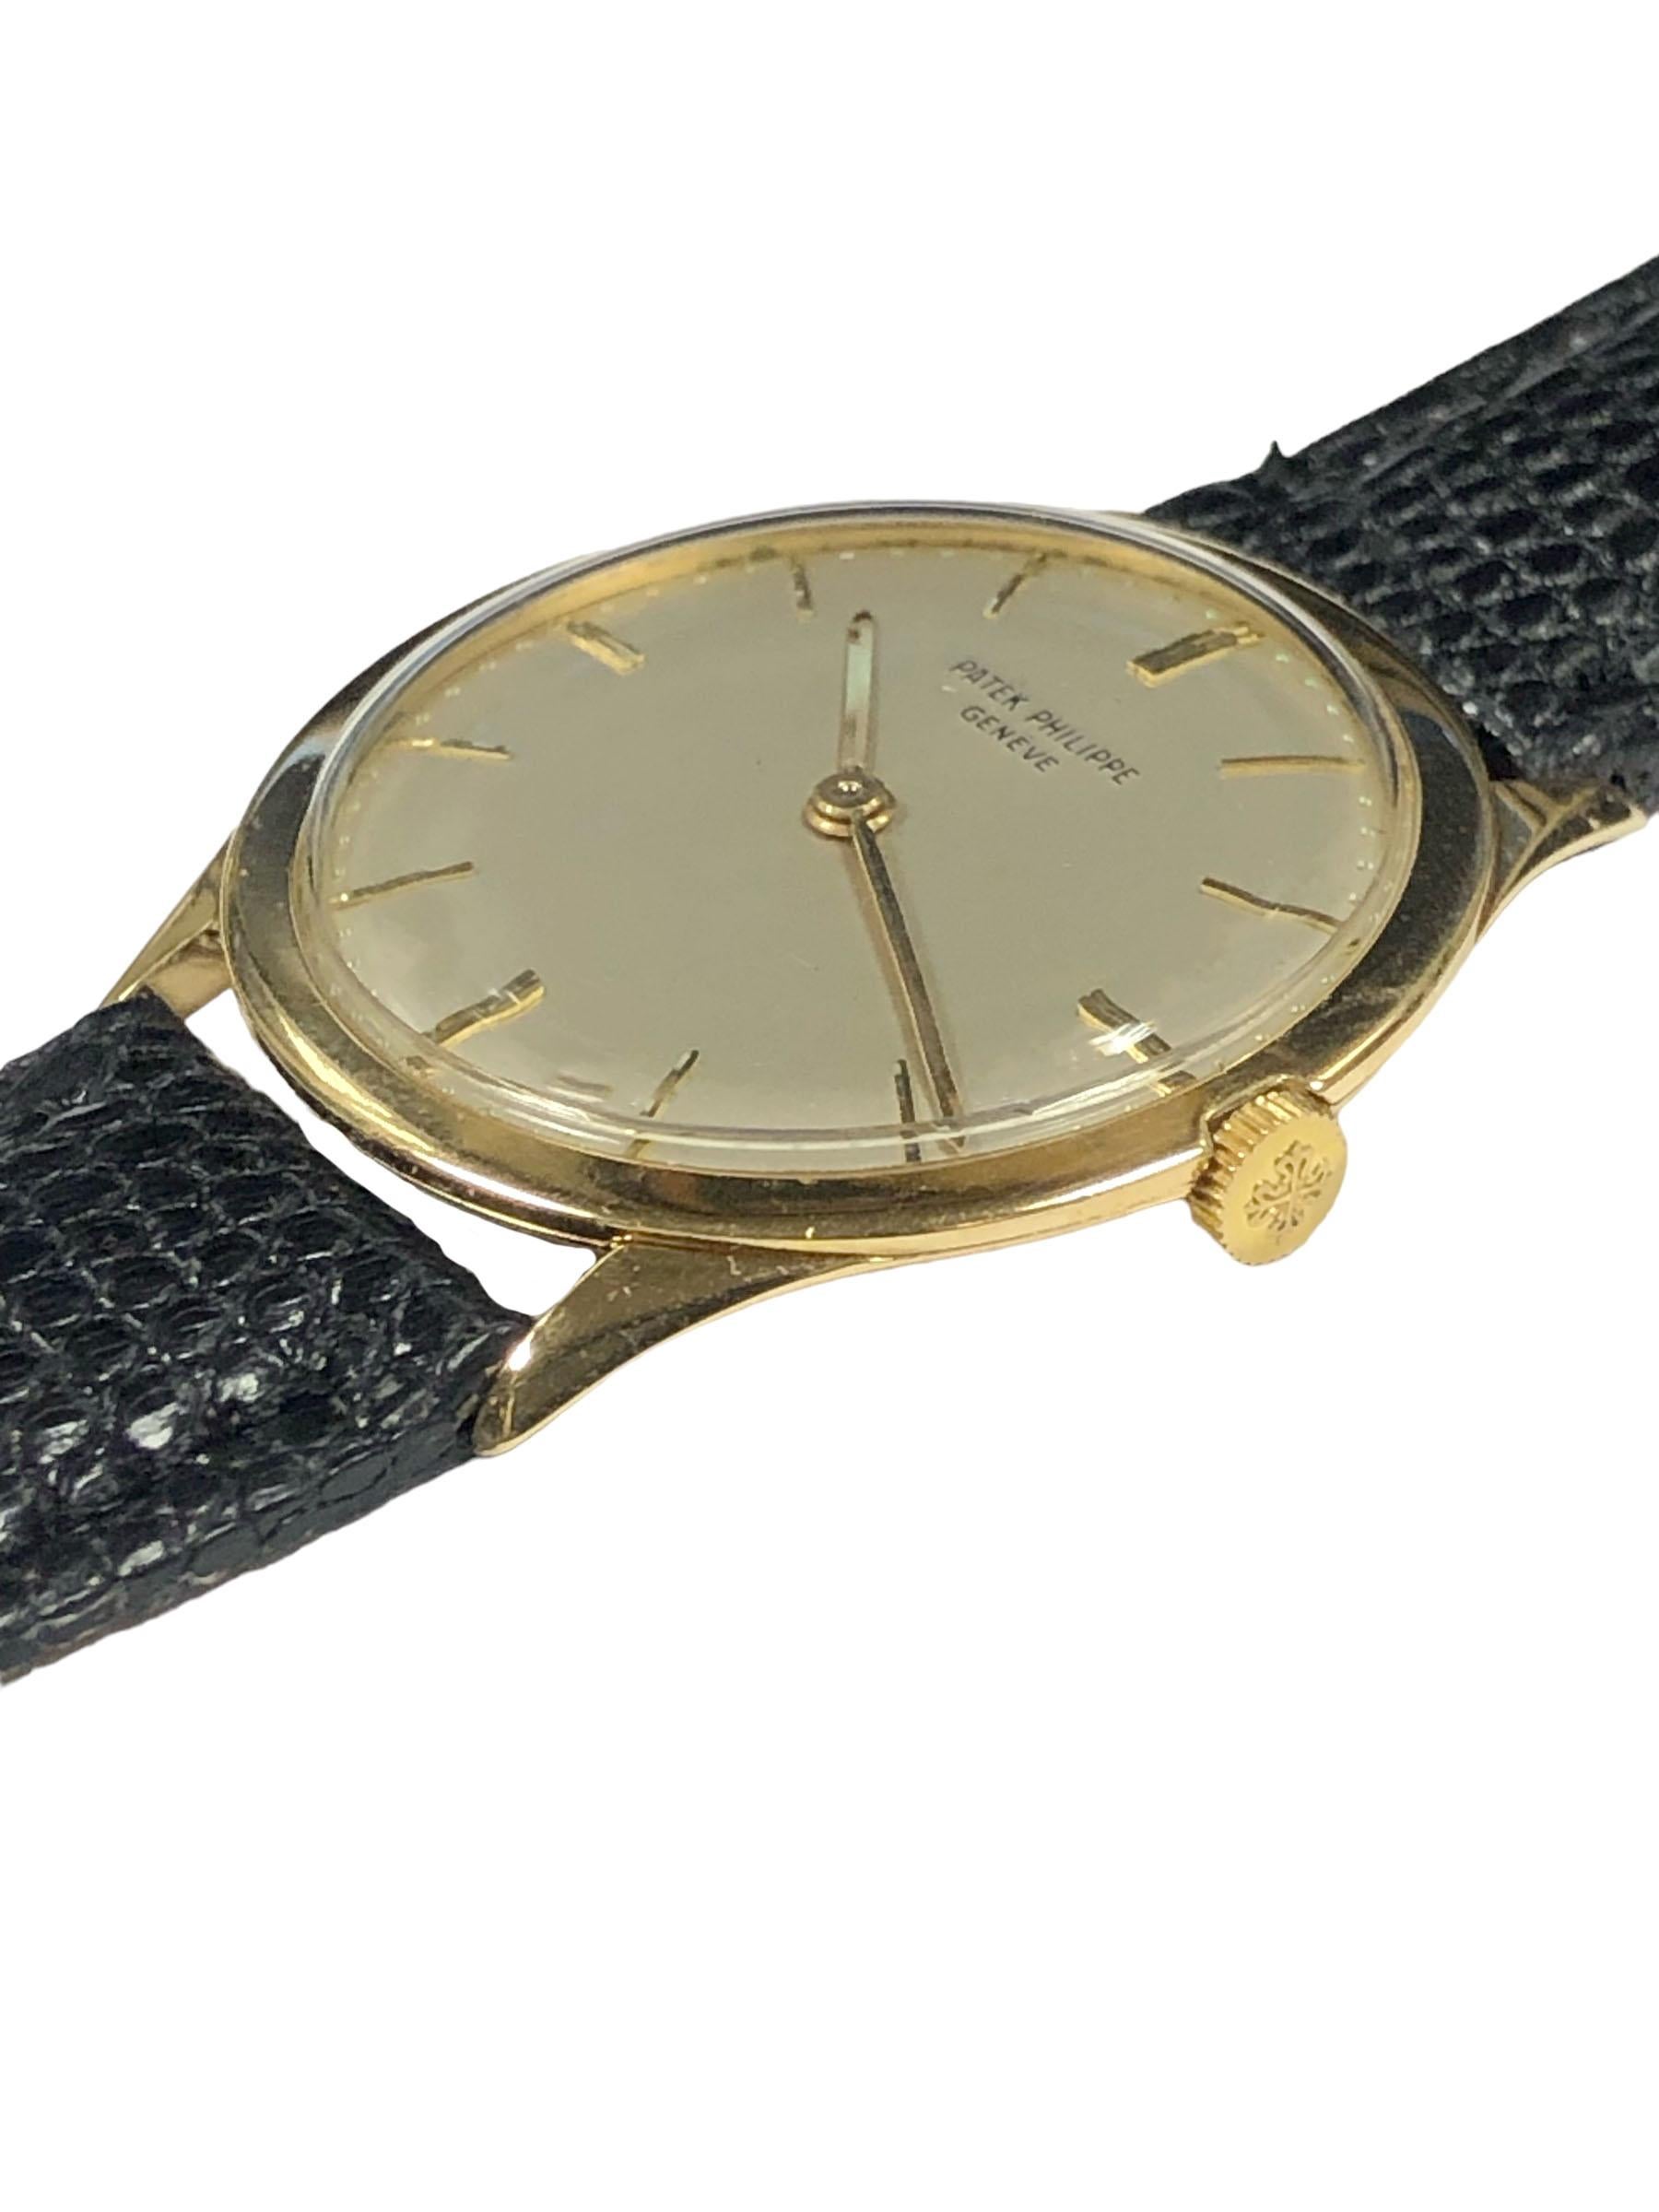 Circa 1960 Patek Philippe Reference 2589 Wrist Watch, 33 M.M. 18k Yellow Gold 3 piece case. 18 Jewel Mechanical, Manual wind  Nickle lever movement. Original mint condition Silver Satin dial with raised Gold markers. New Black Lizard Strap, watch